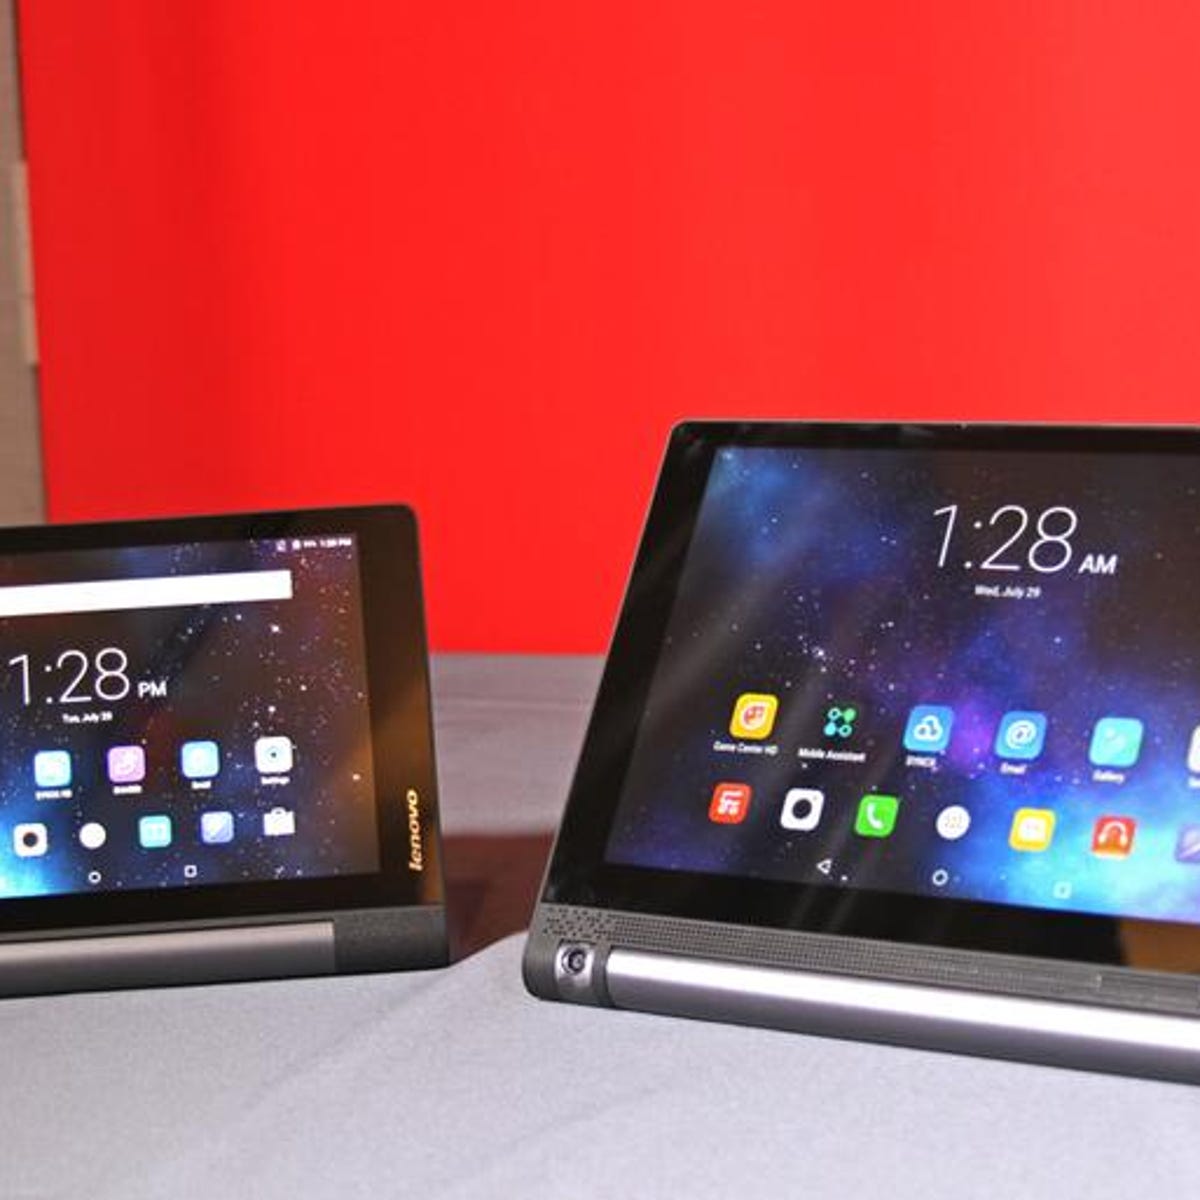 Lenovo Yoga Tab 3 review: An affordable Android tablet with